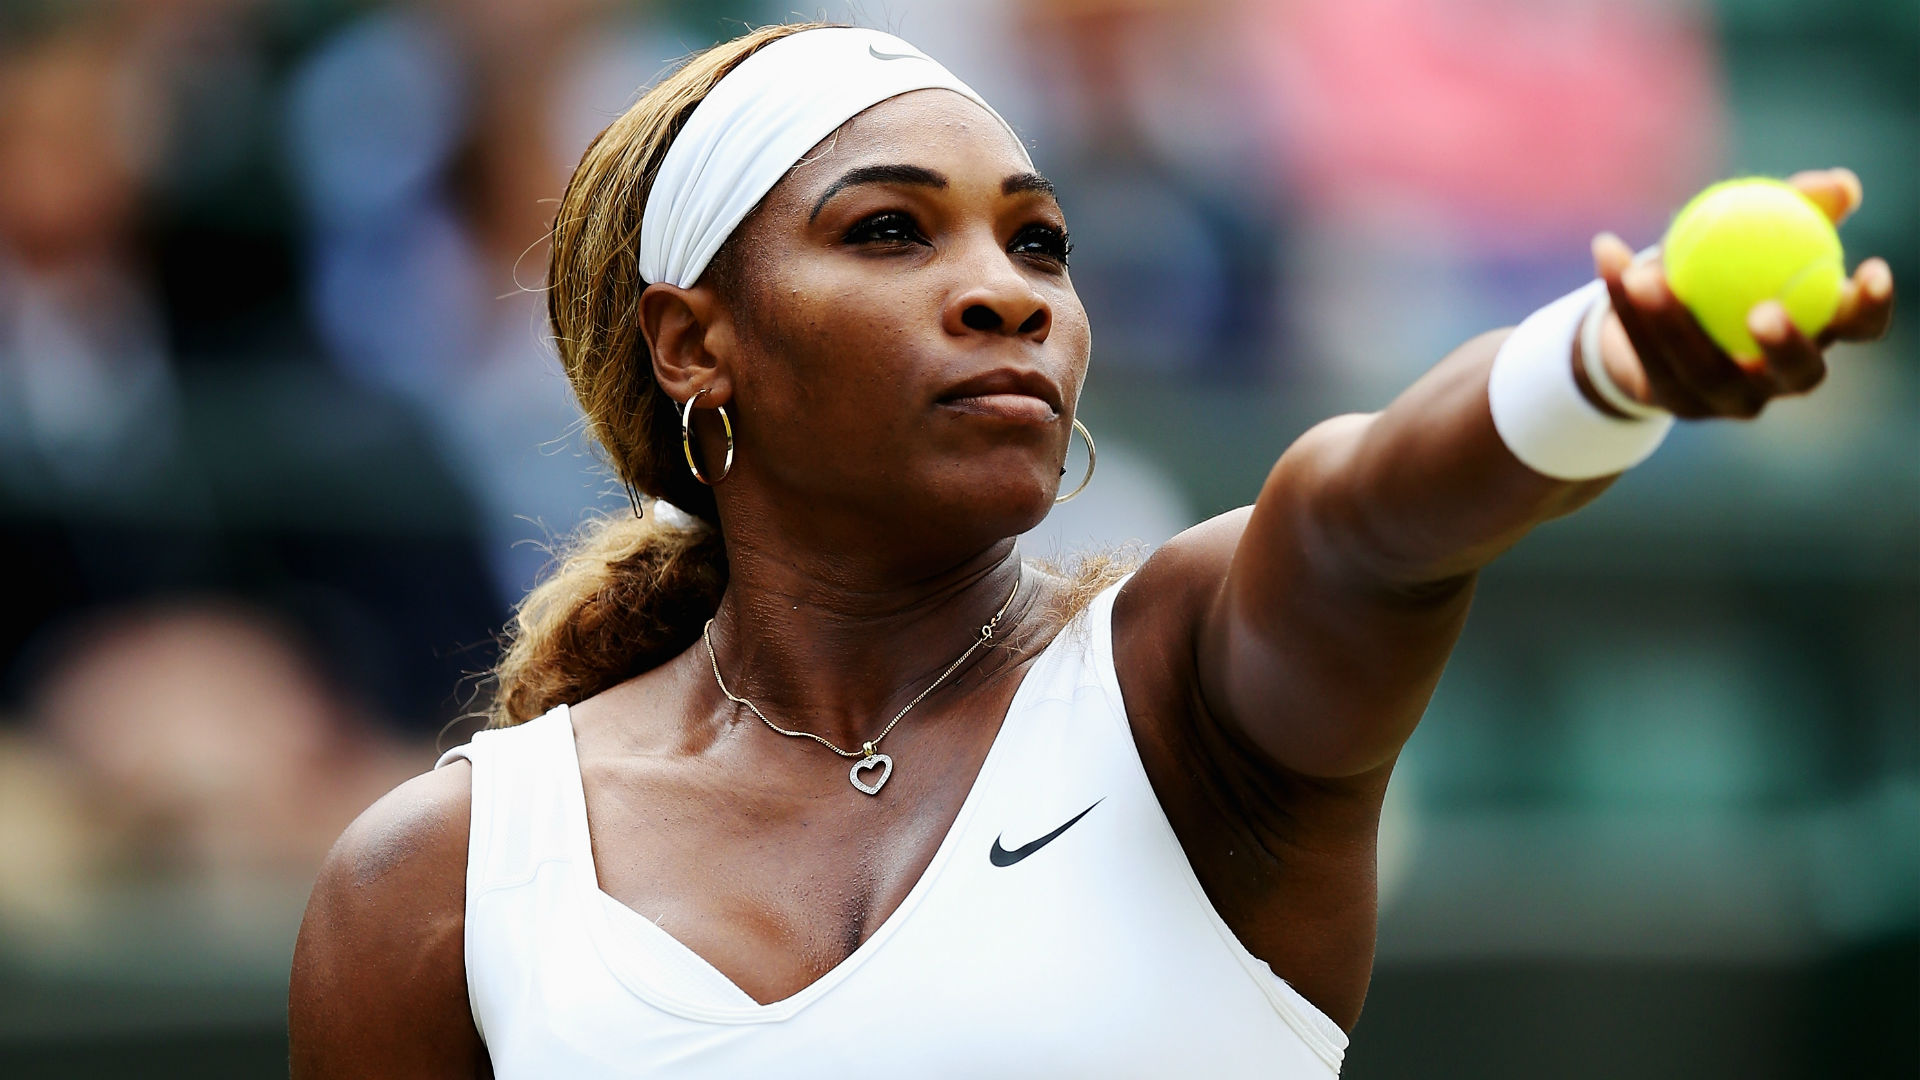 Wimbledon women's draw: Serena Williams could face Venus in 4th round | Tennis ...1920 x 1080